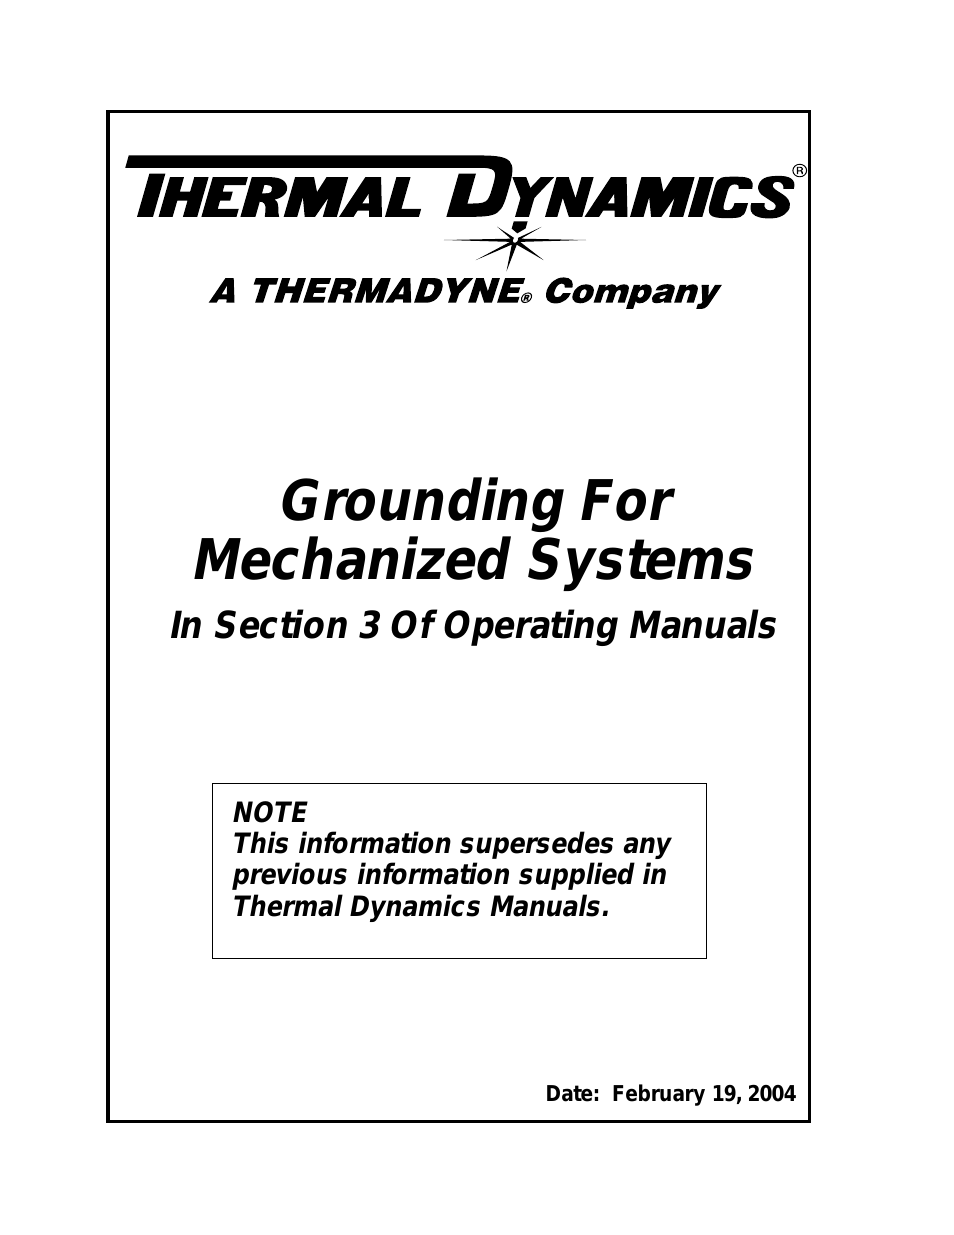 Grounding For Mechanized Systems